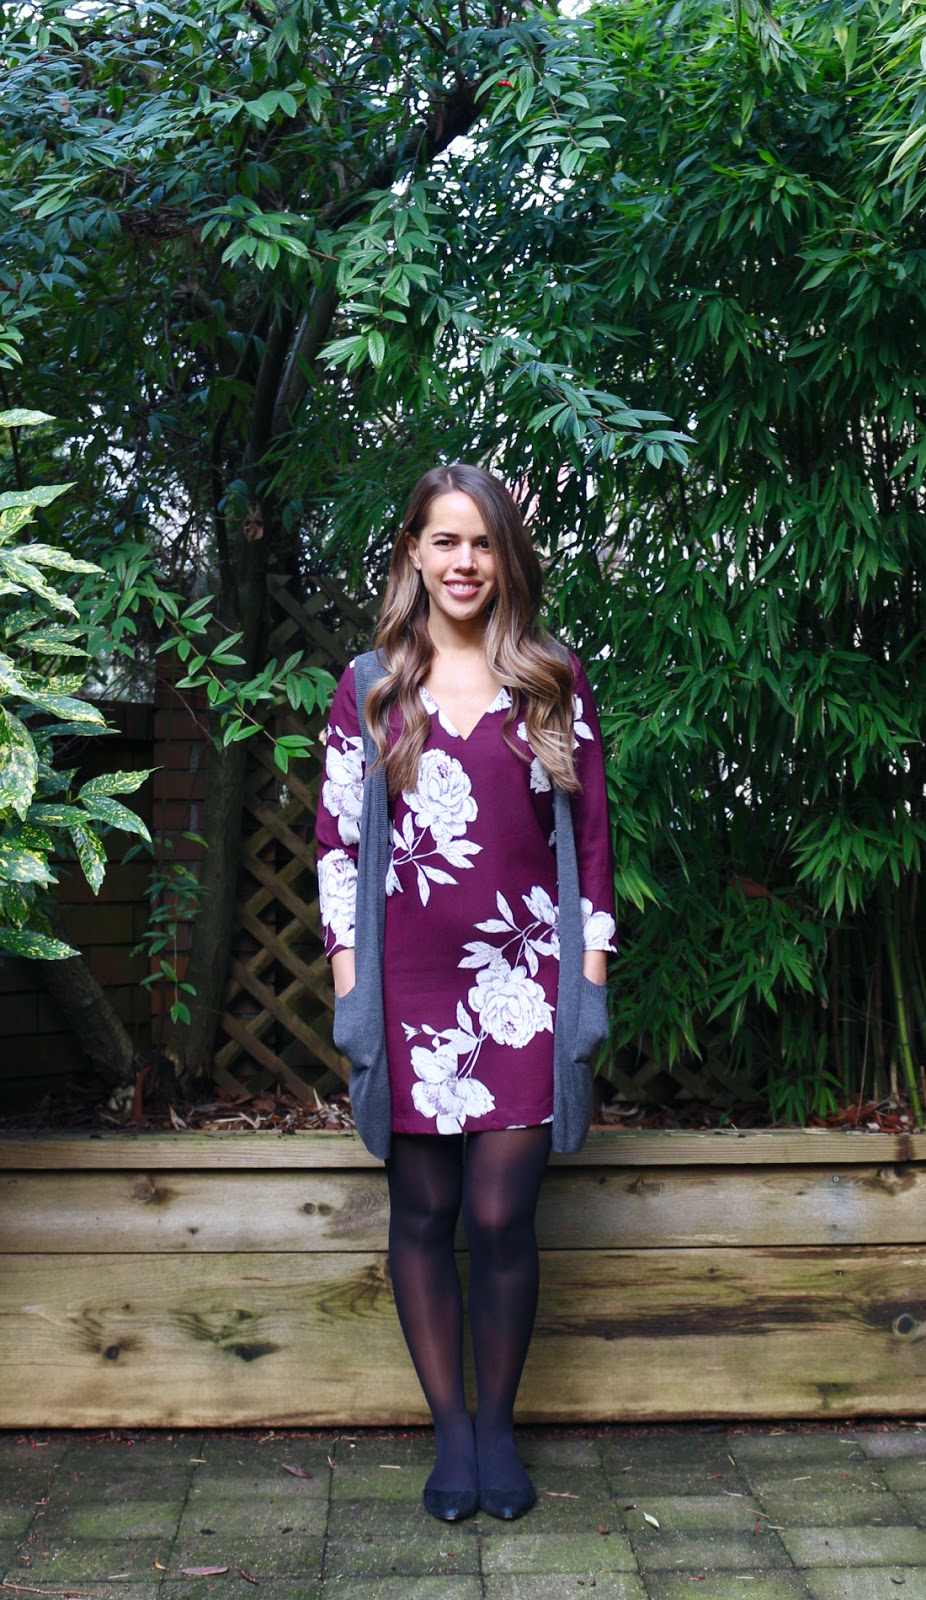 Jules in Flats - Floral Shift Dress with Sweater Vest (Business Casual Winter Workwear on a Budget)